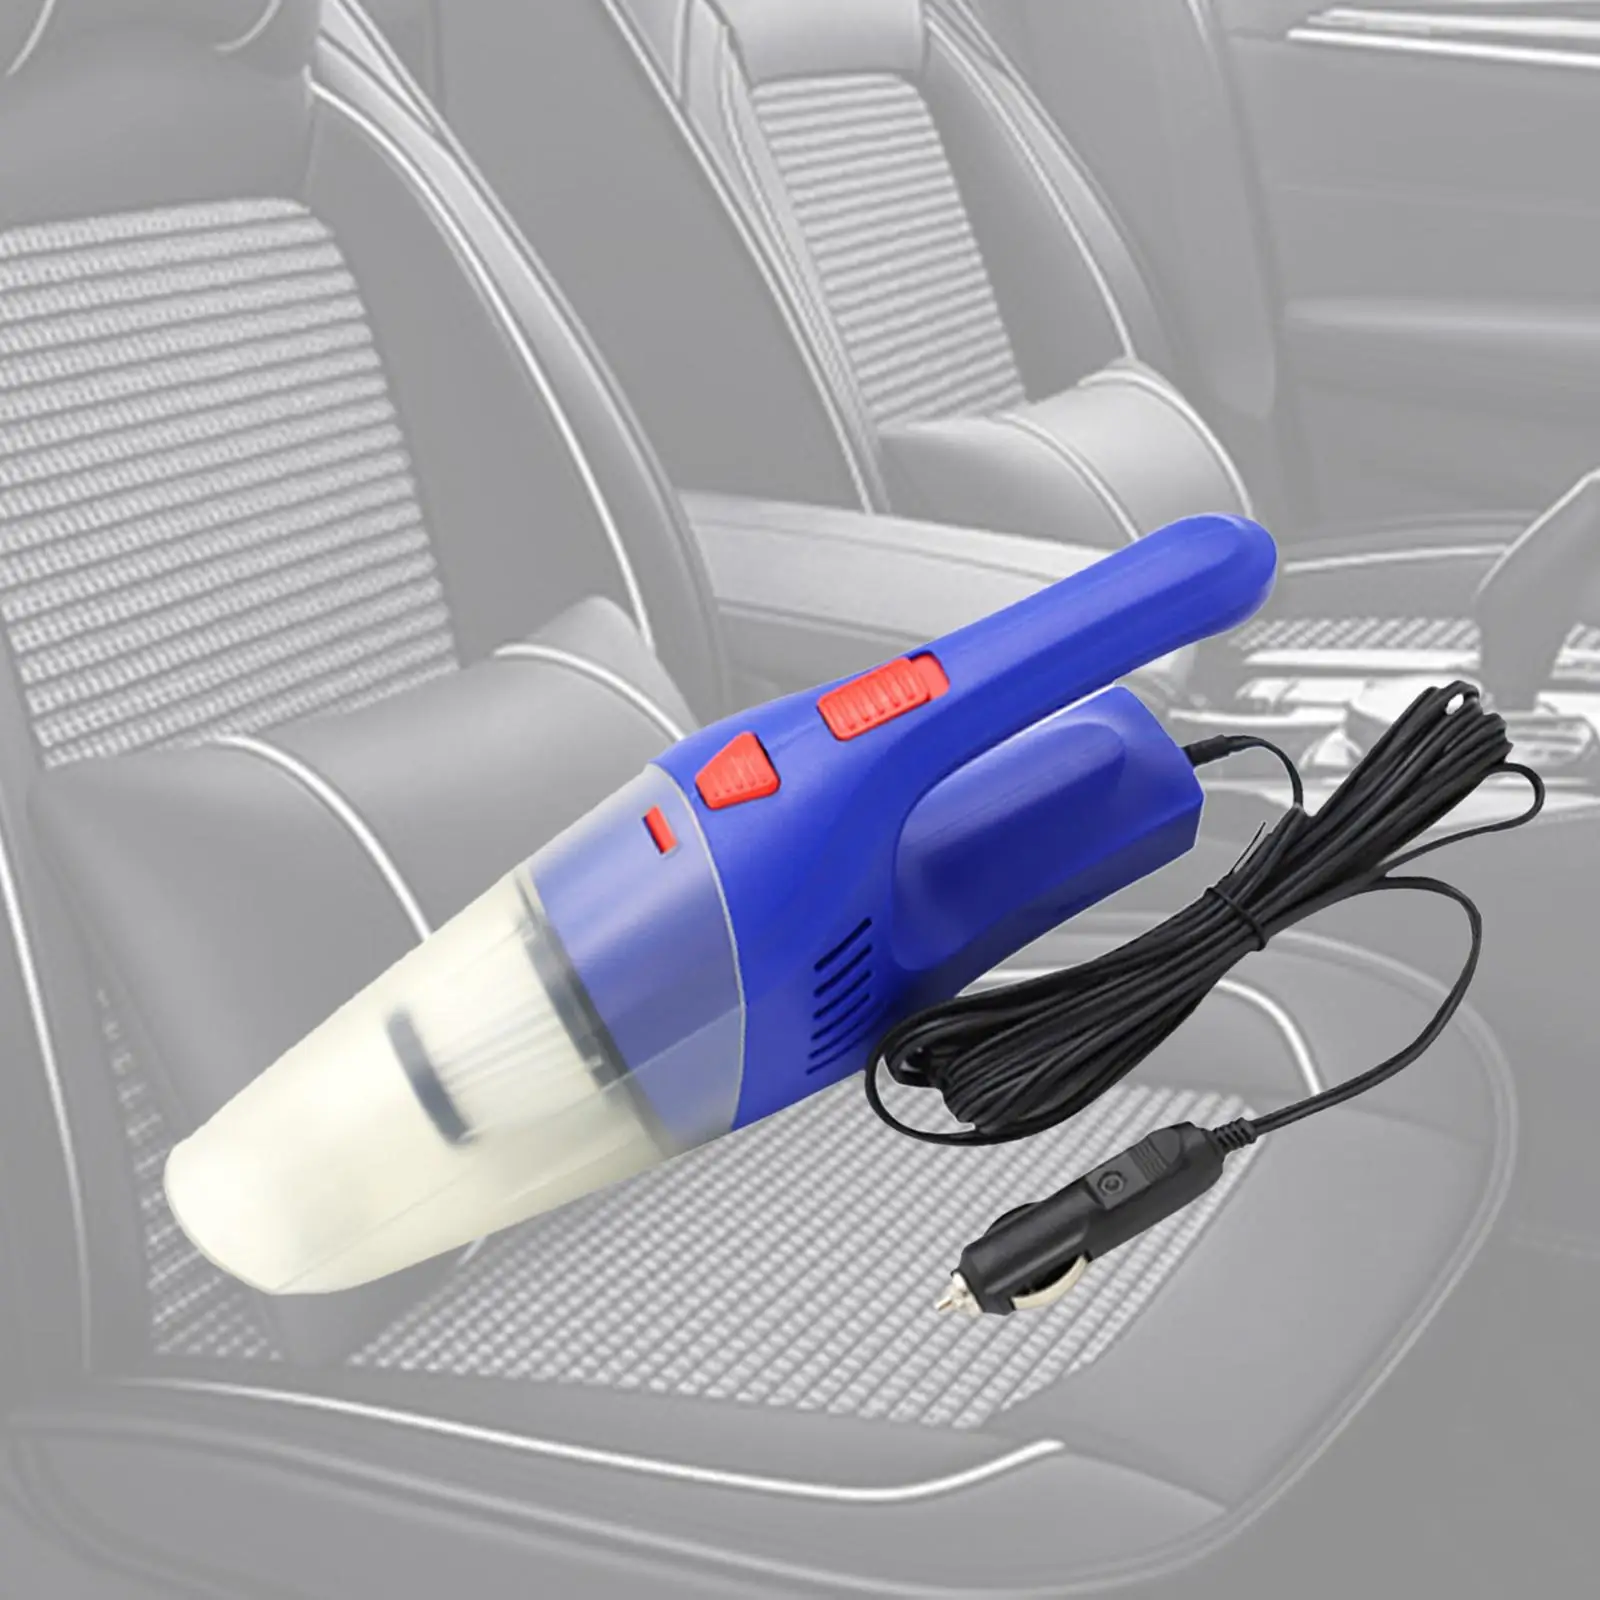 Handheld Car Vacuum Cleaner 6000PA Vacuum Cleaning Portable Fit for Home